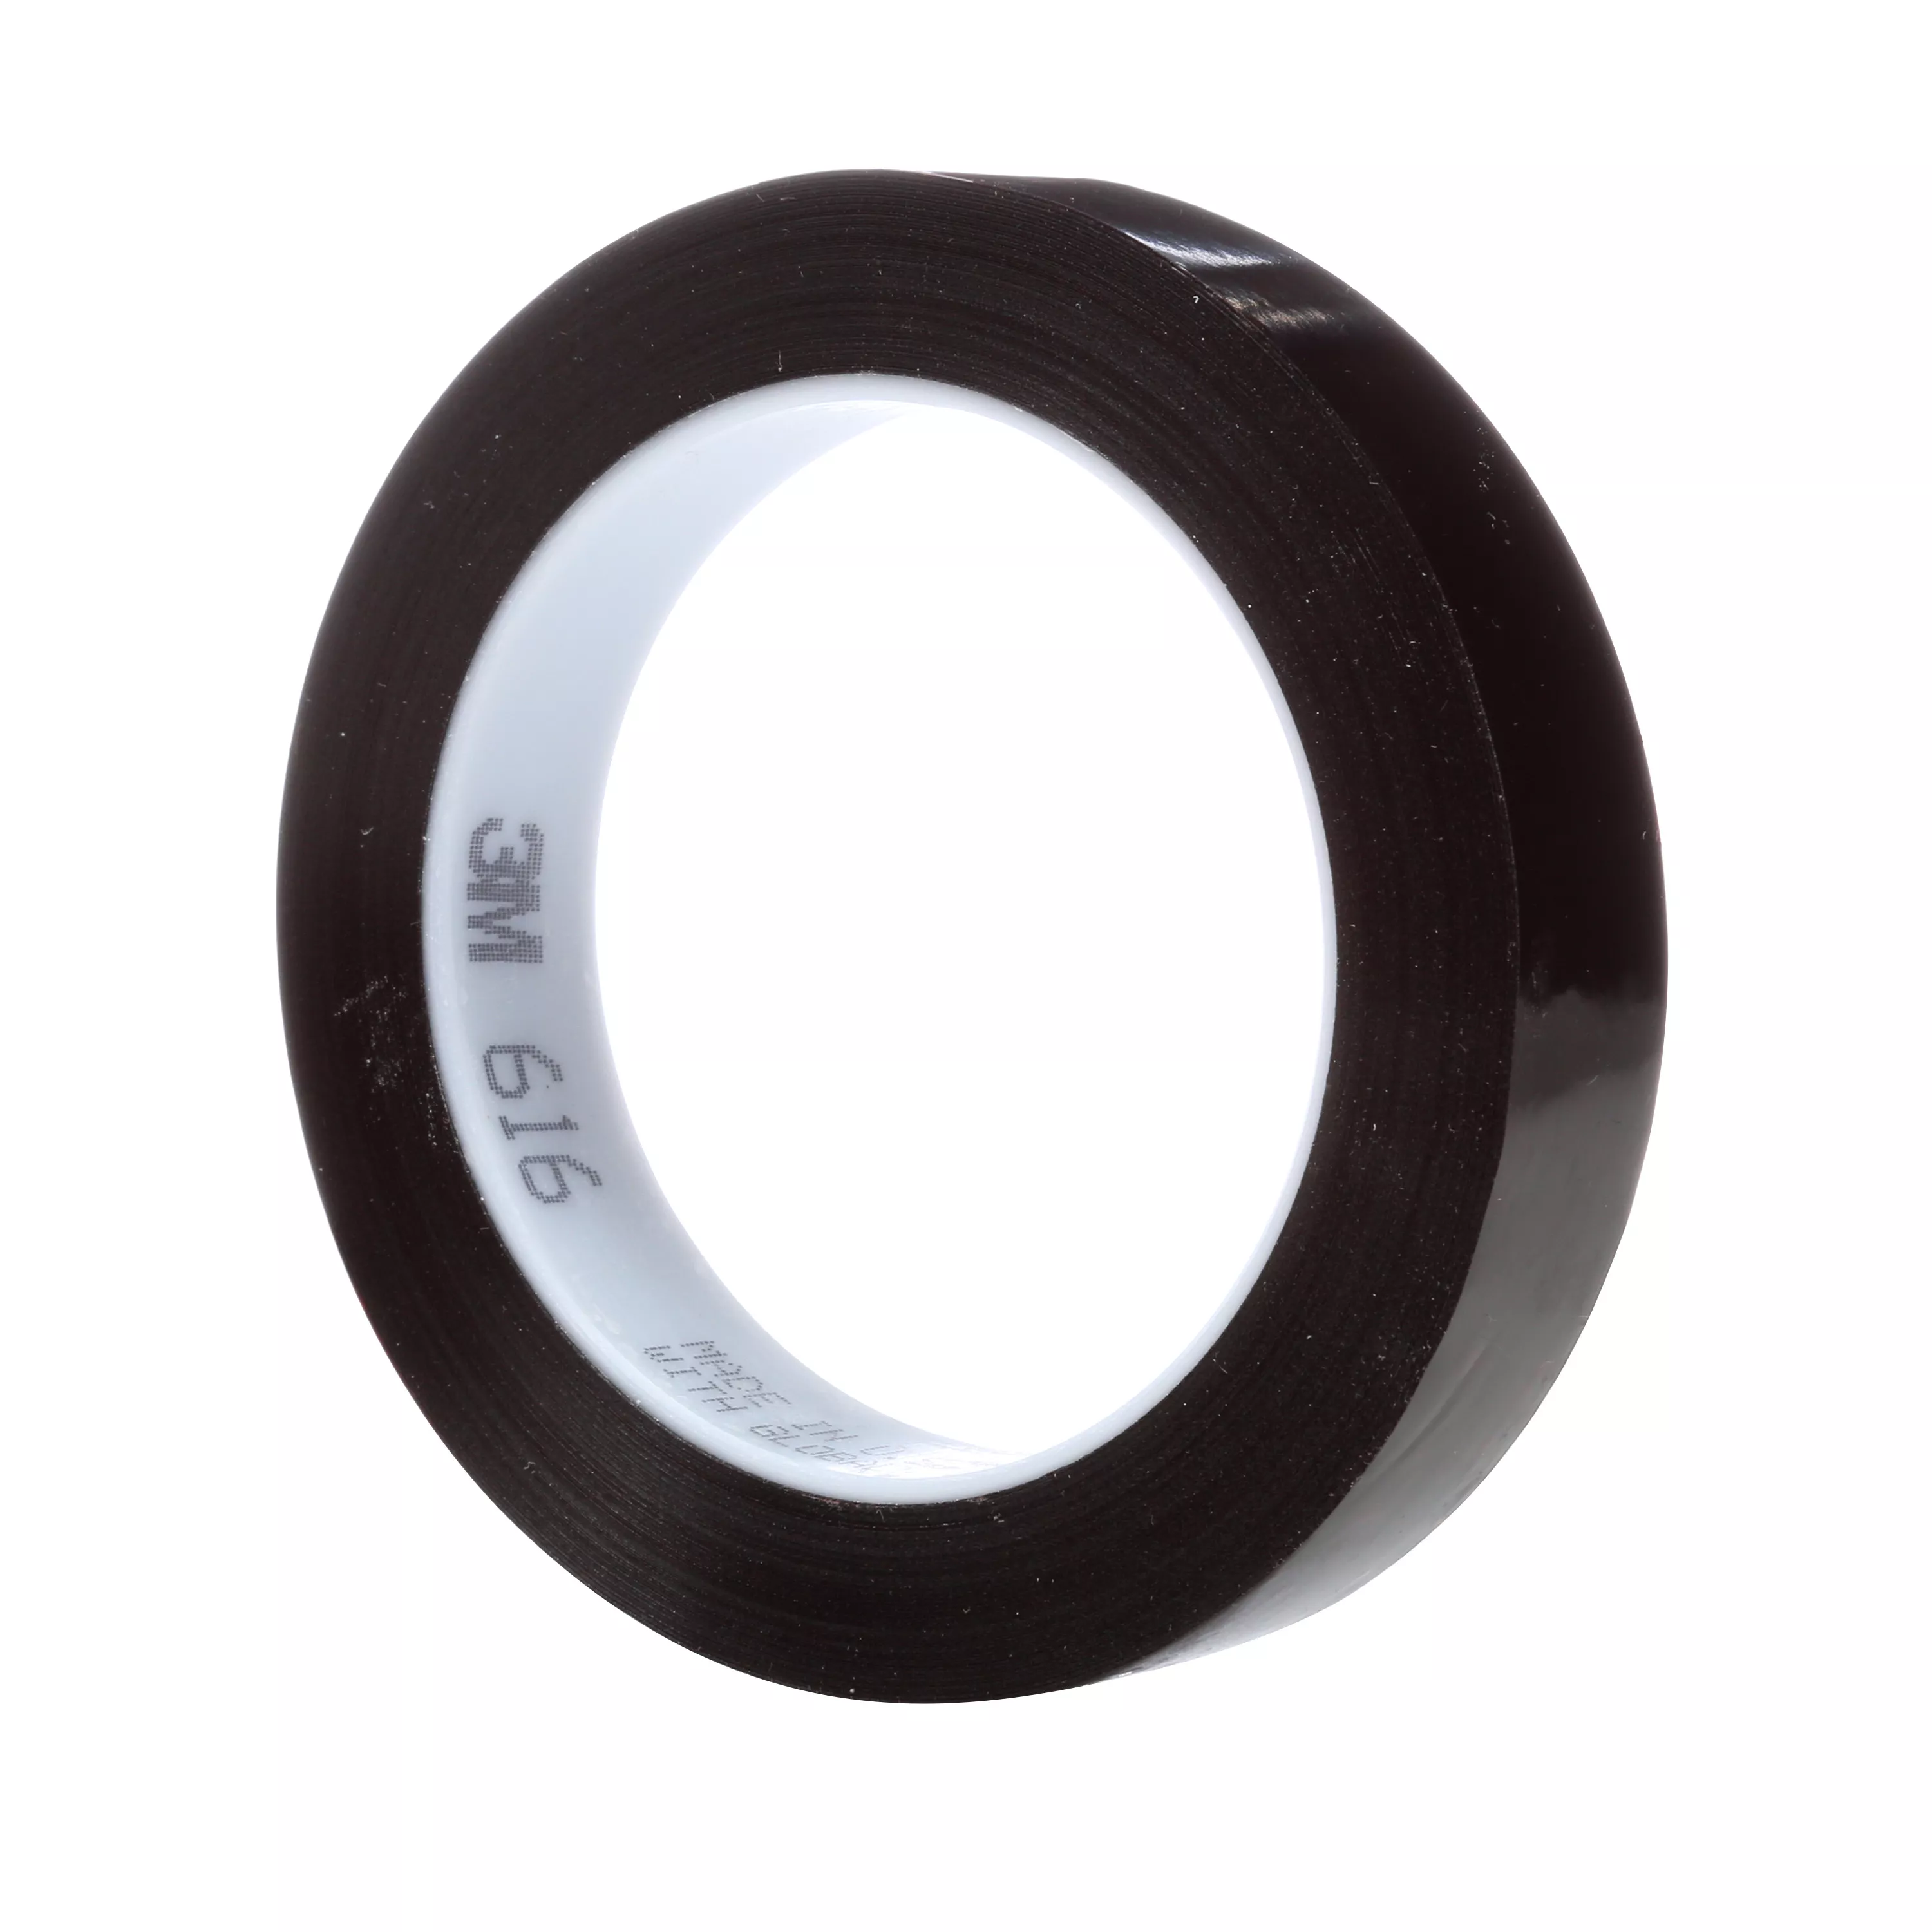 Product Number 616 | 3M™ Lithographers Tape 616